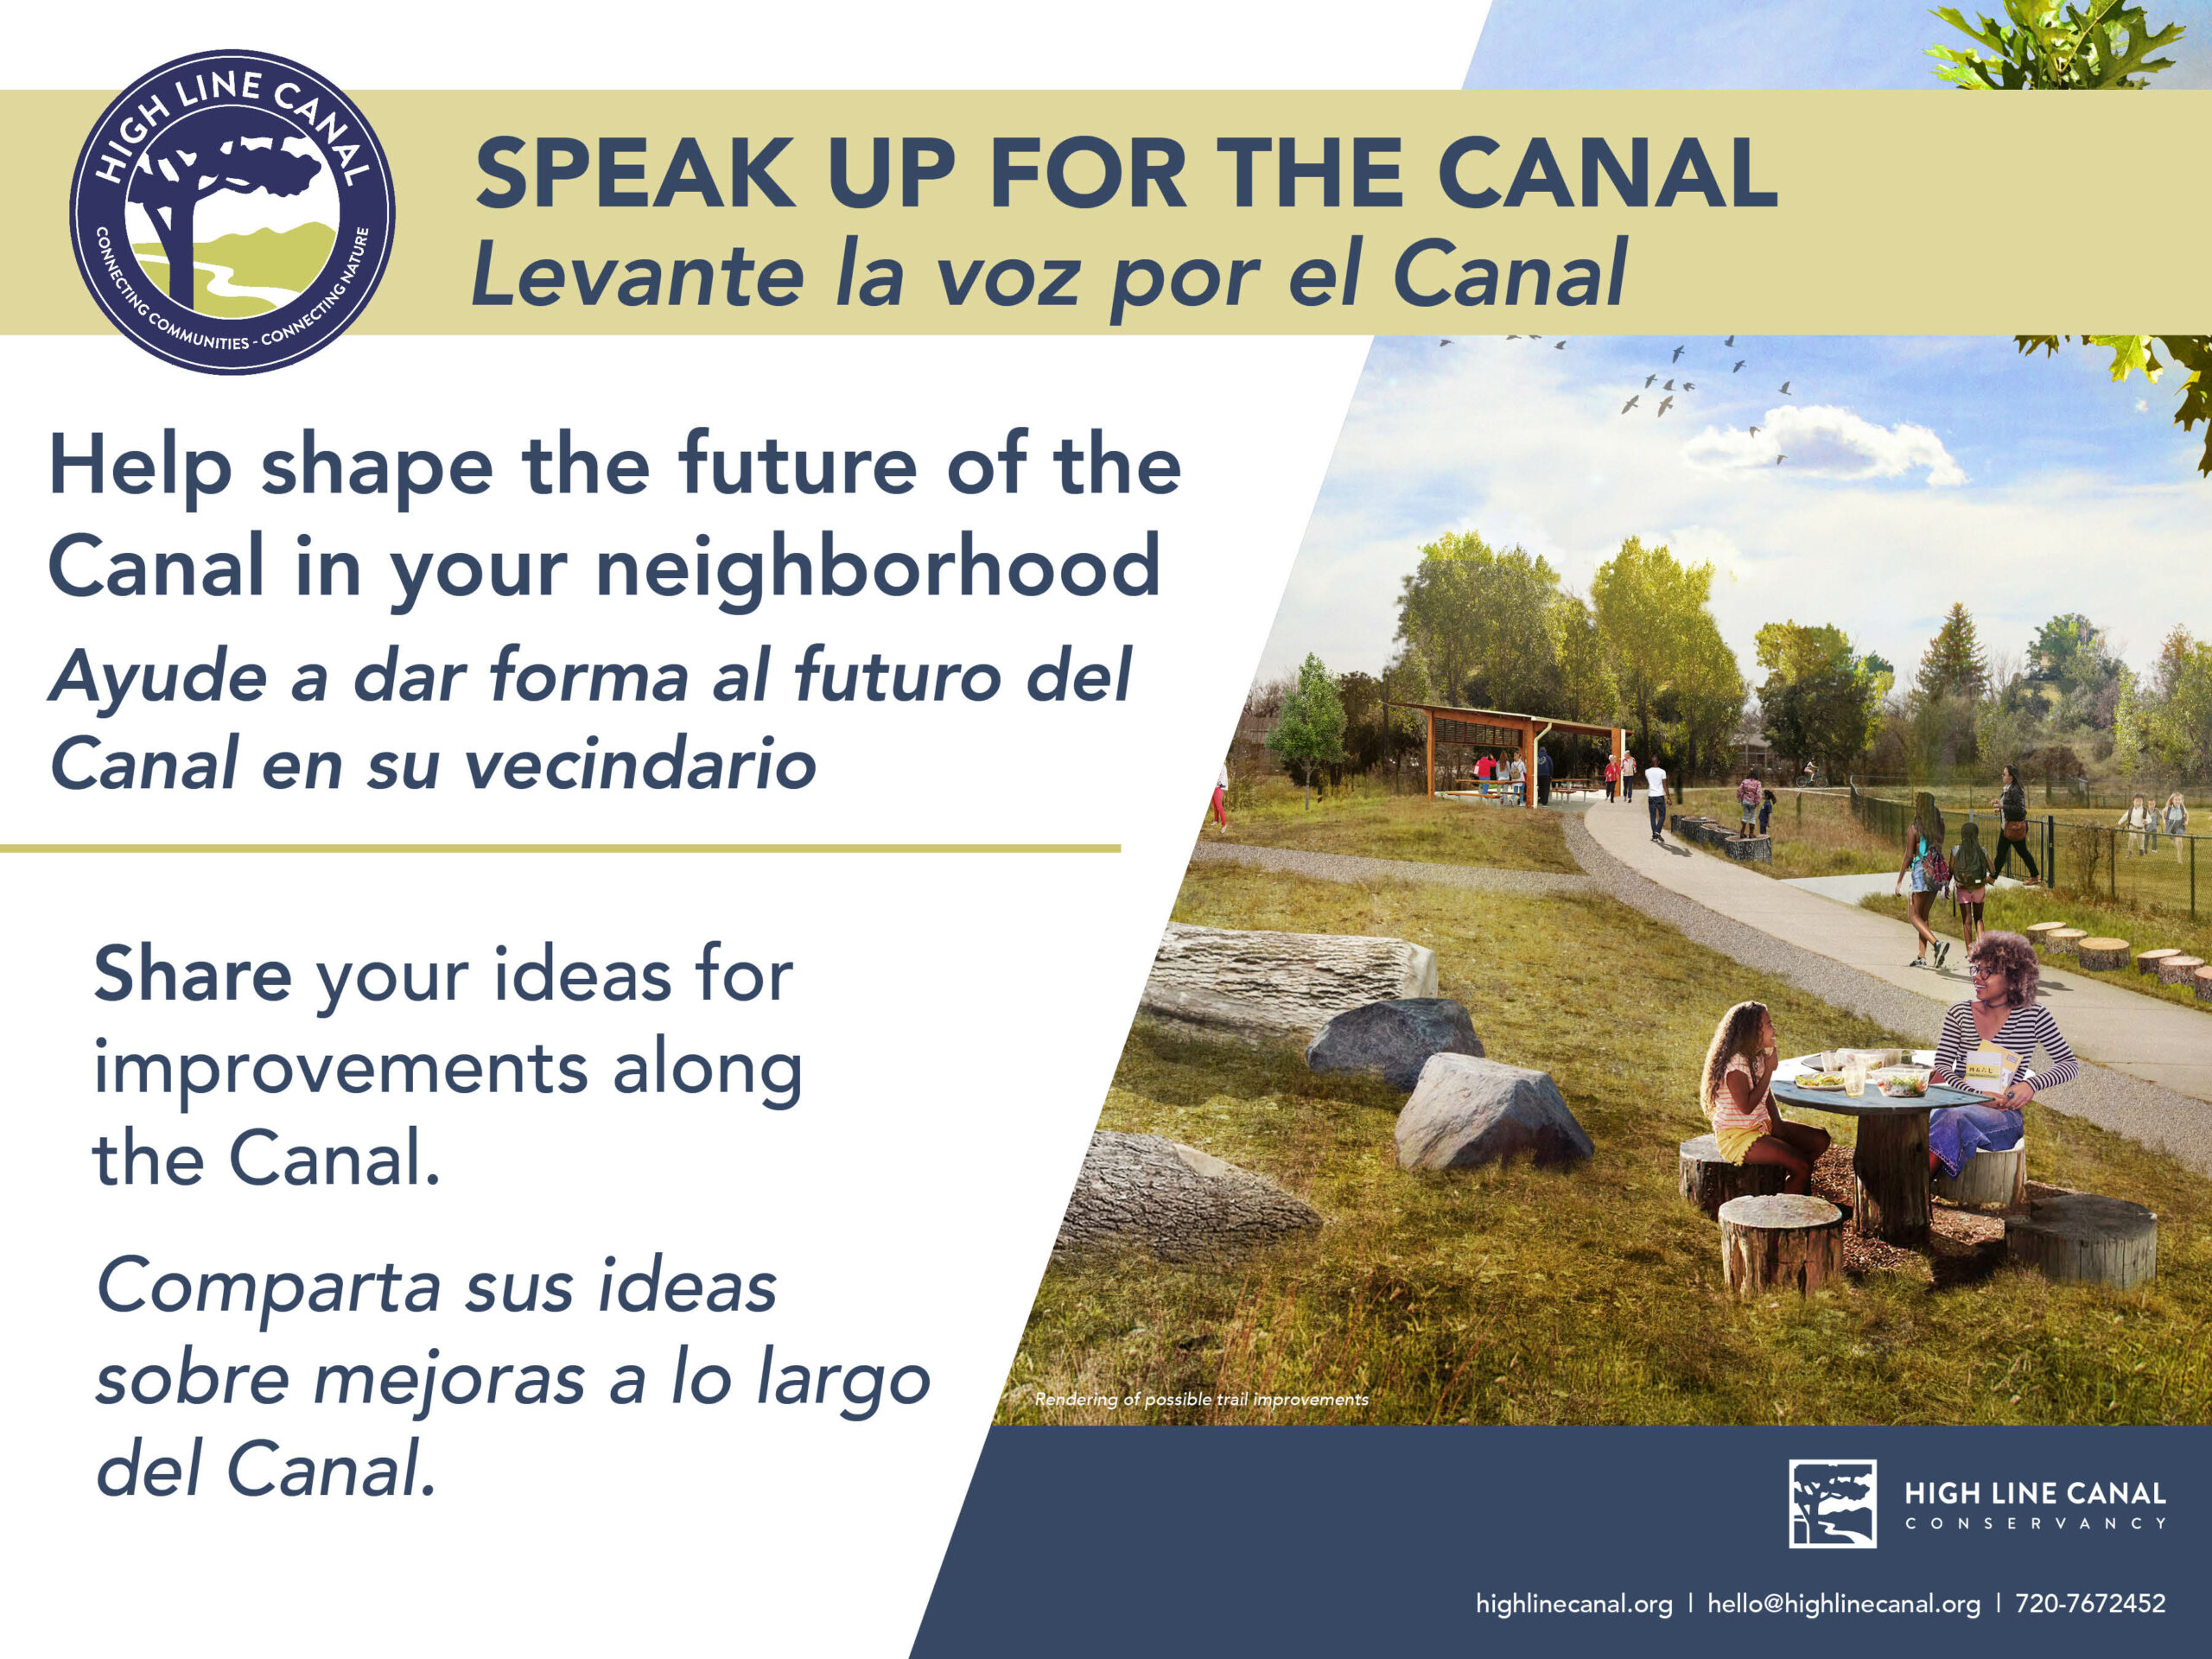 Speak Up for the Canal. Take the survey!